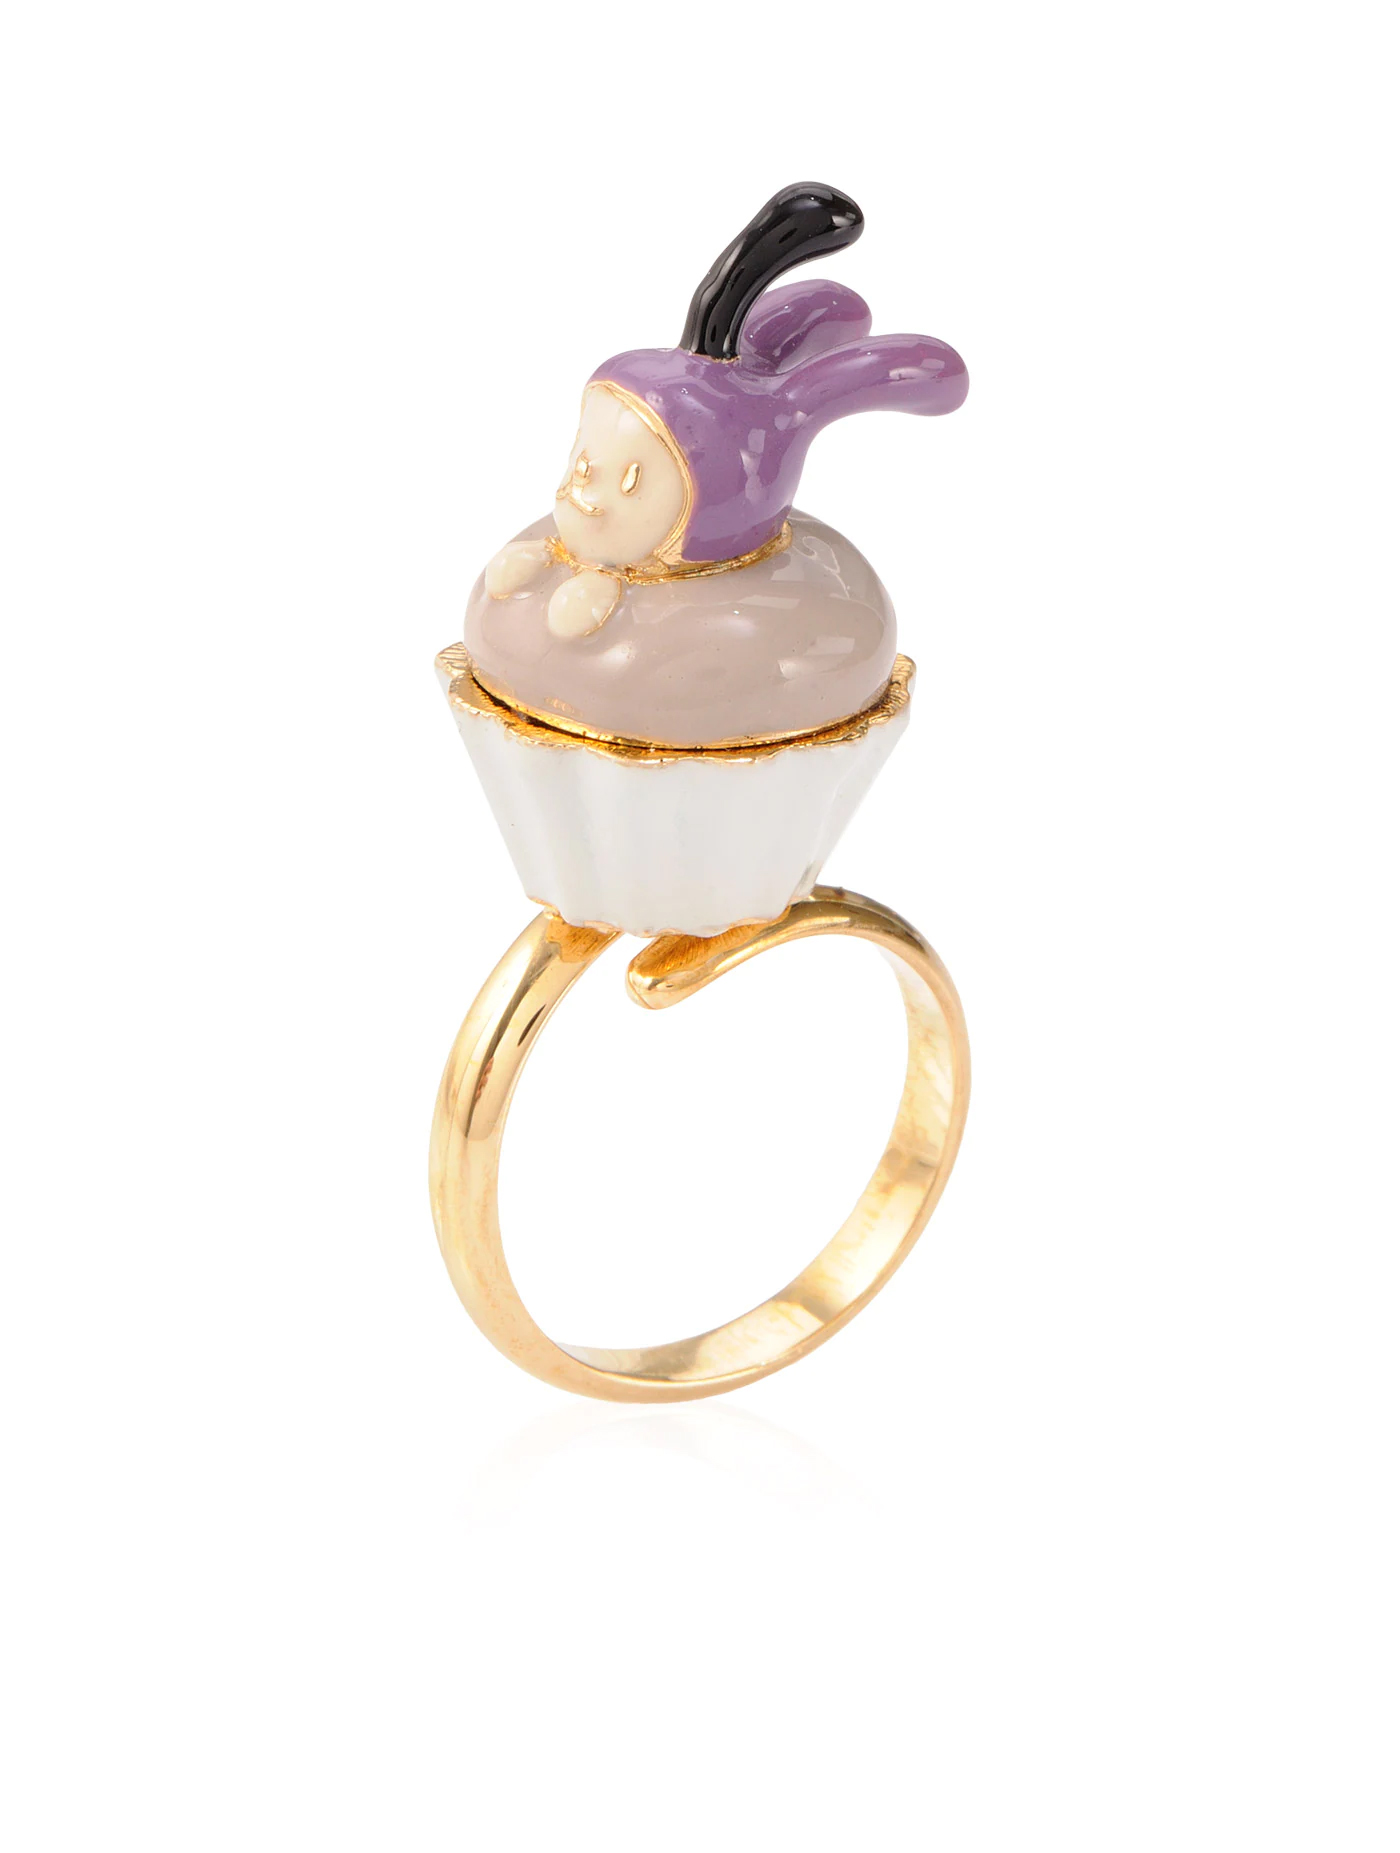 The Little Pink Rabbit Ring